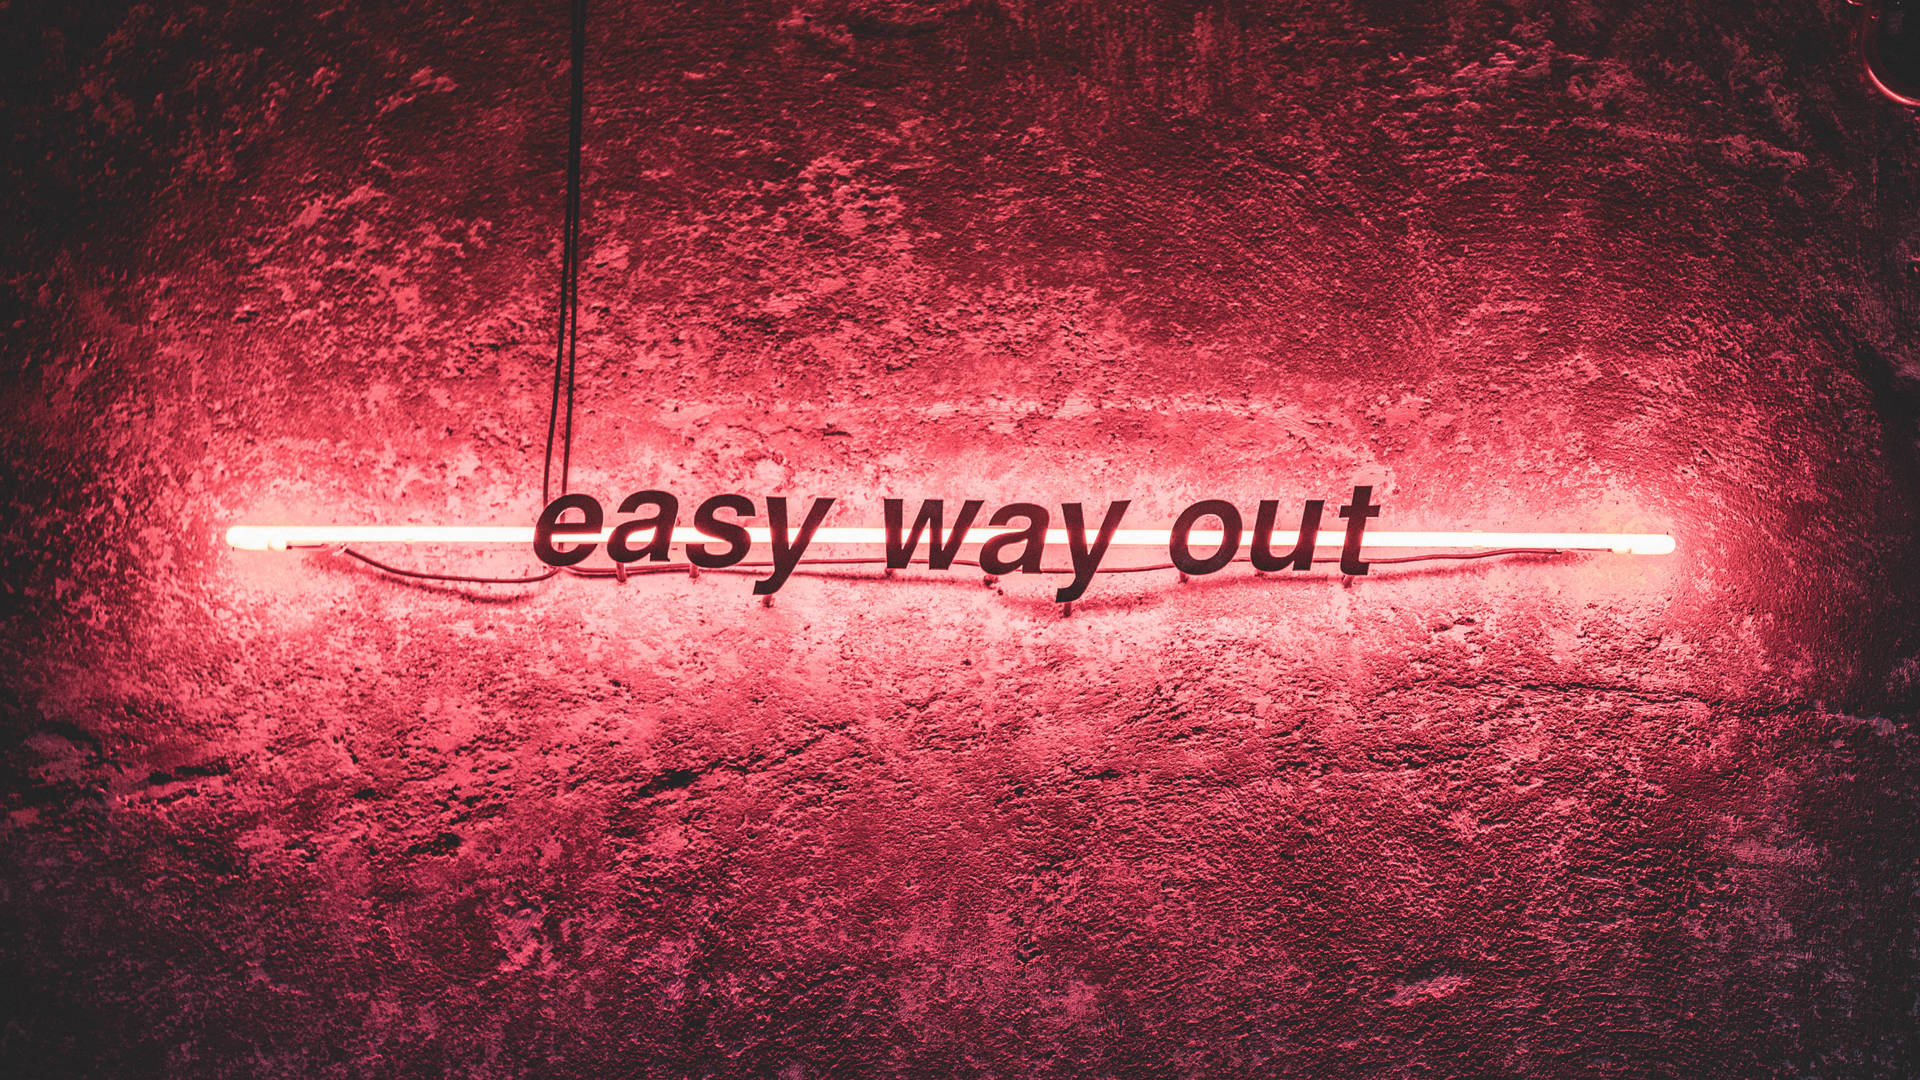 Easy Way Out Neon Sign Wallpaper